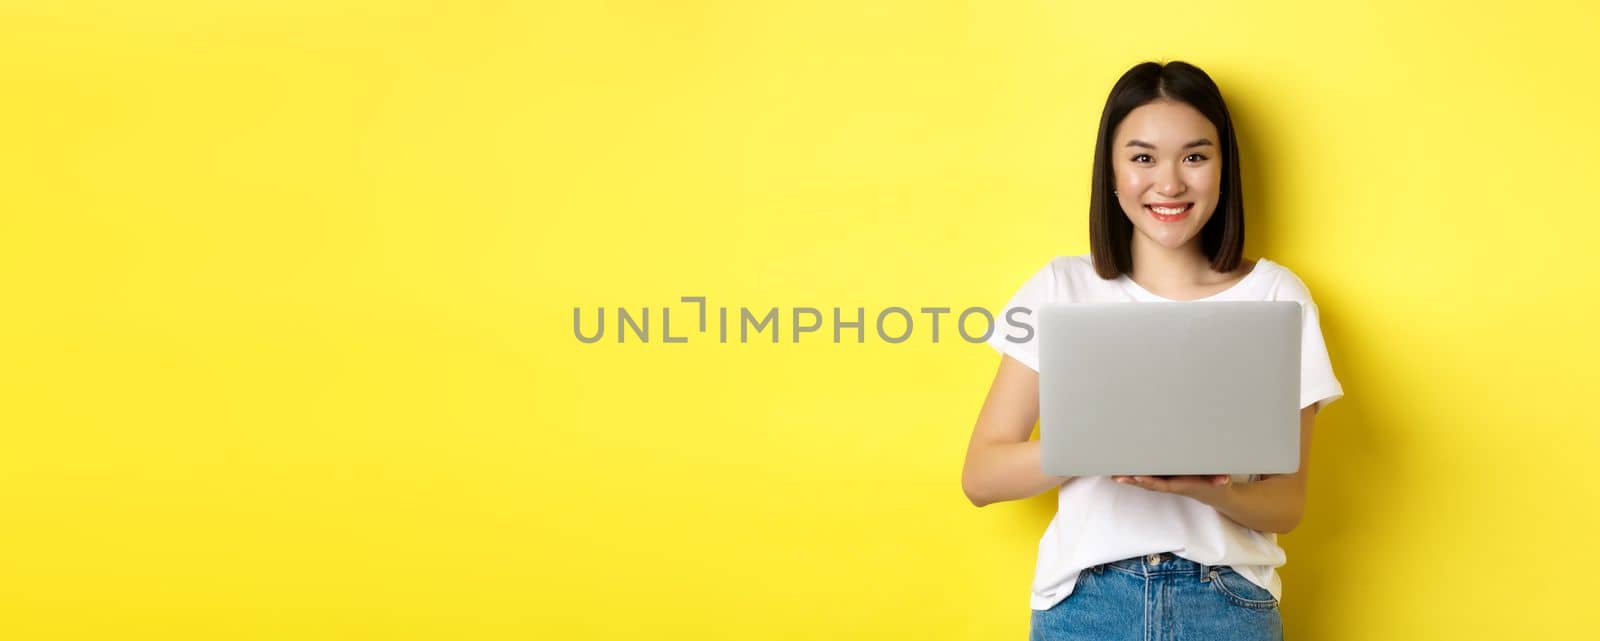 Cute asian woman studying on laptop and smiling, standing in white t-shirt and jeans against yellow background.